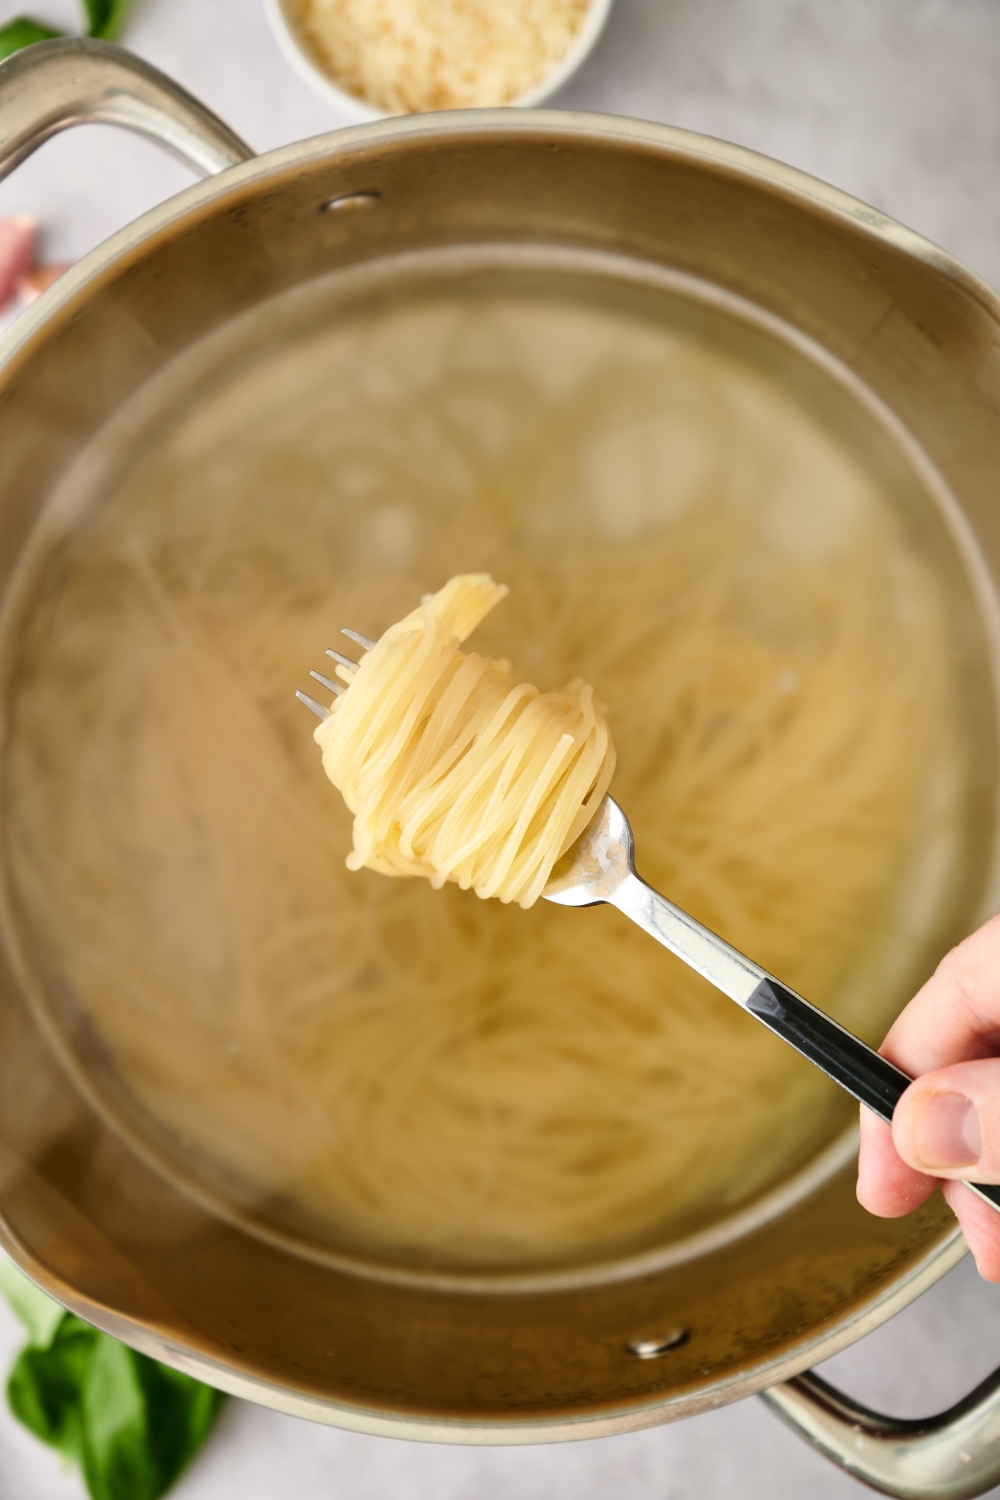 Someone holding a fork with spaghetti twisted around it. A pot of spaghetti in boiling water is underneath.